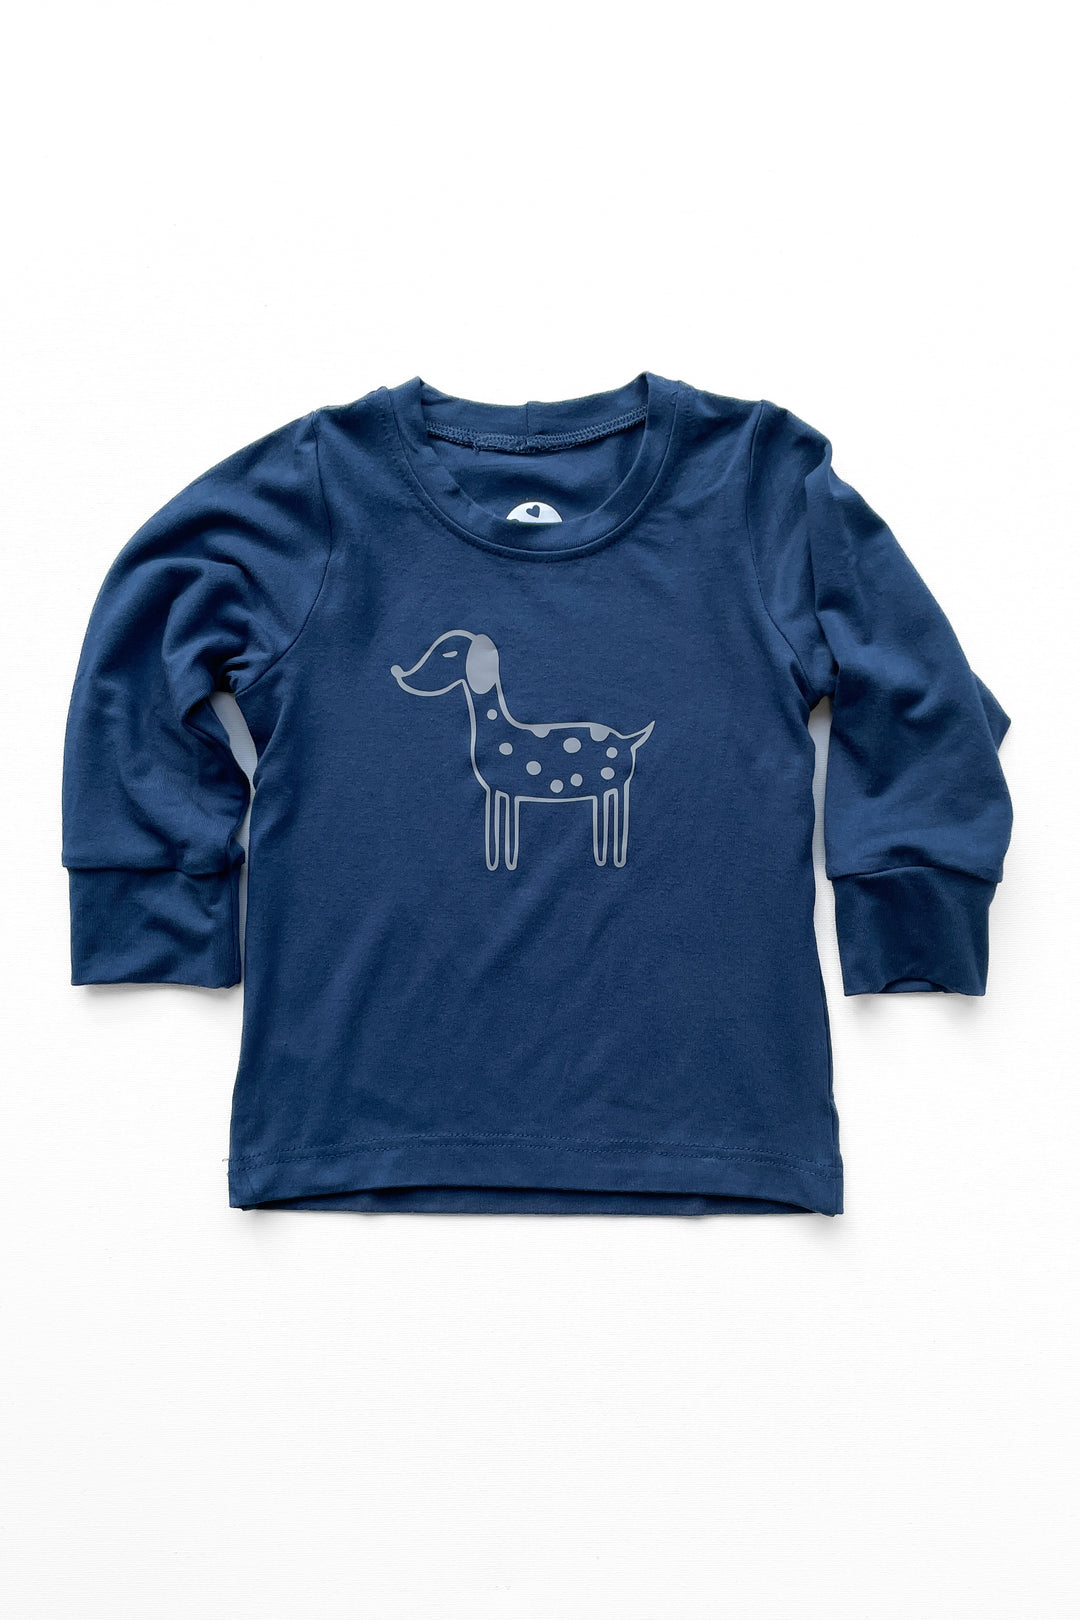 Maxime sweater for baby - Jacques the Dog